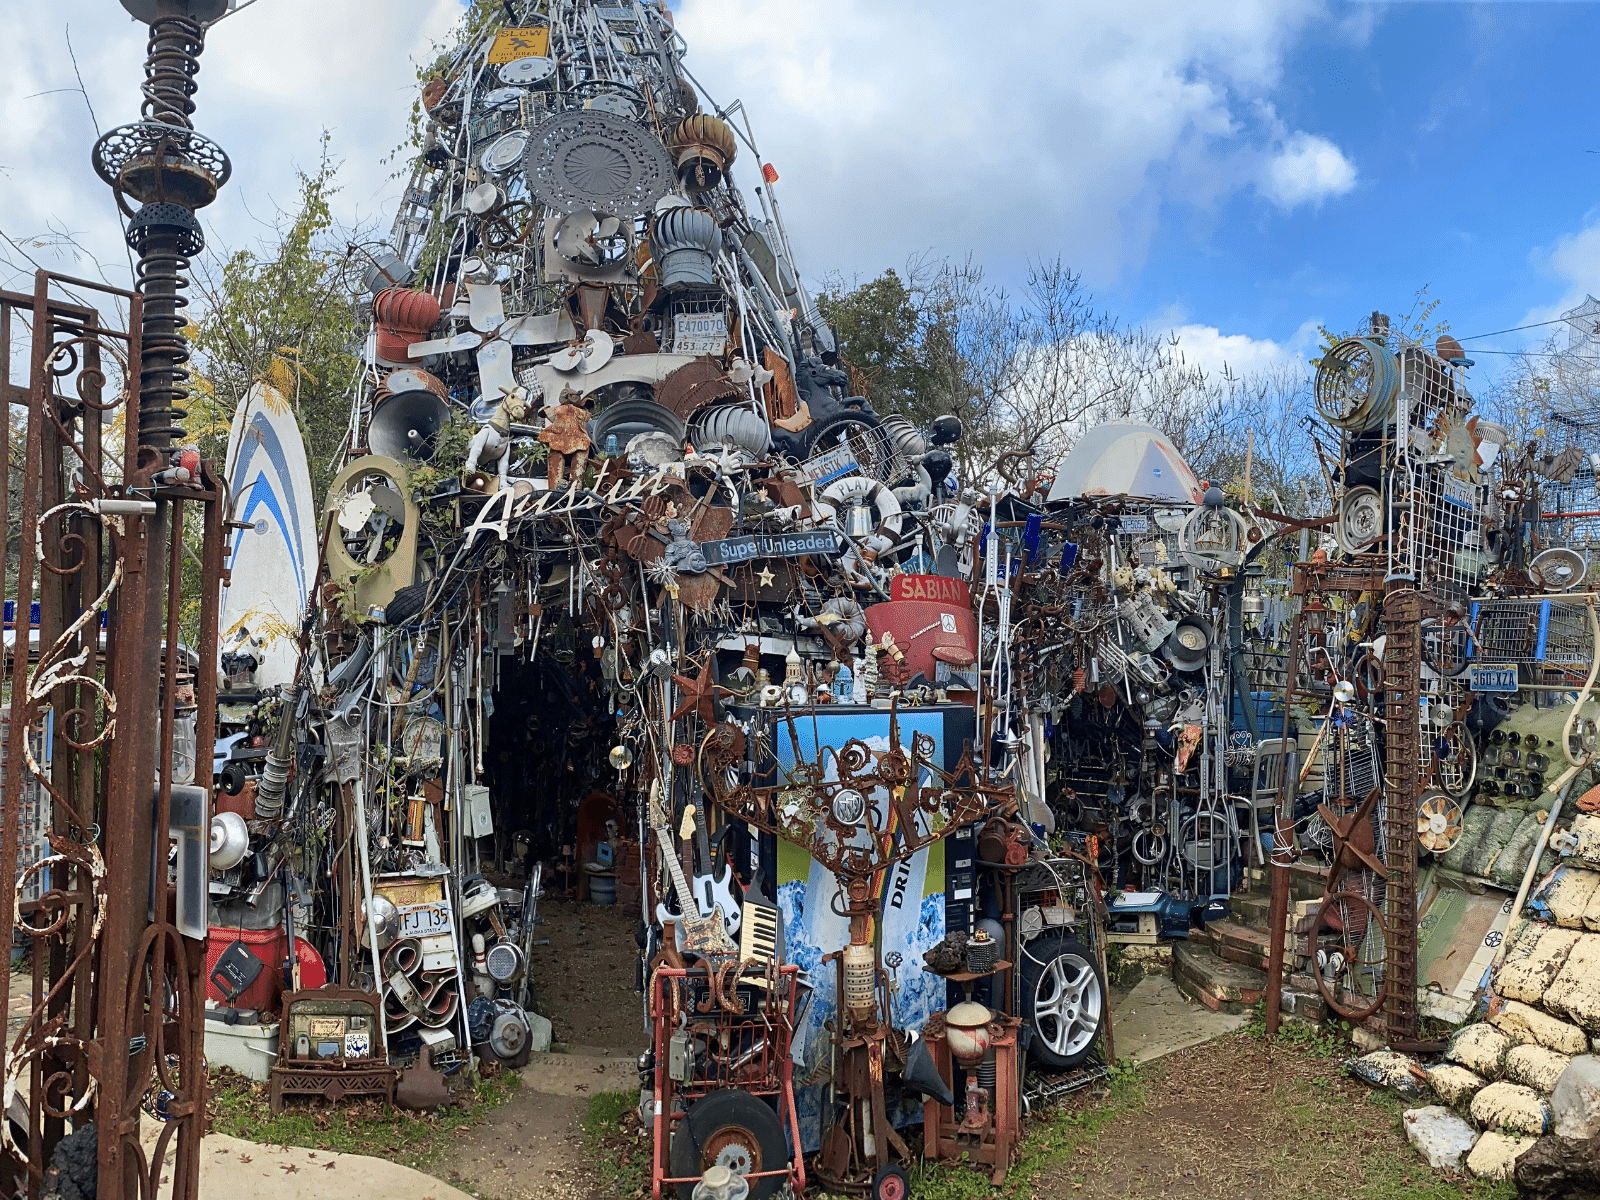 Cathedral of Junk in Austin, where is Laura traveling